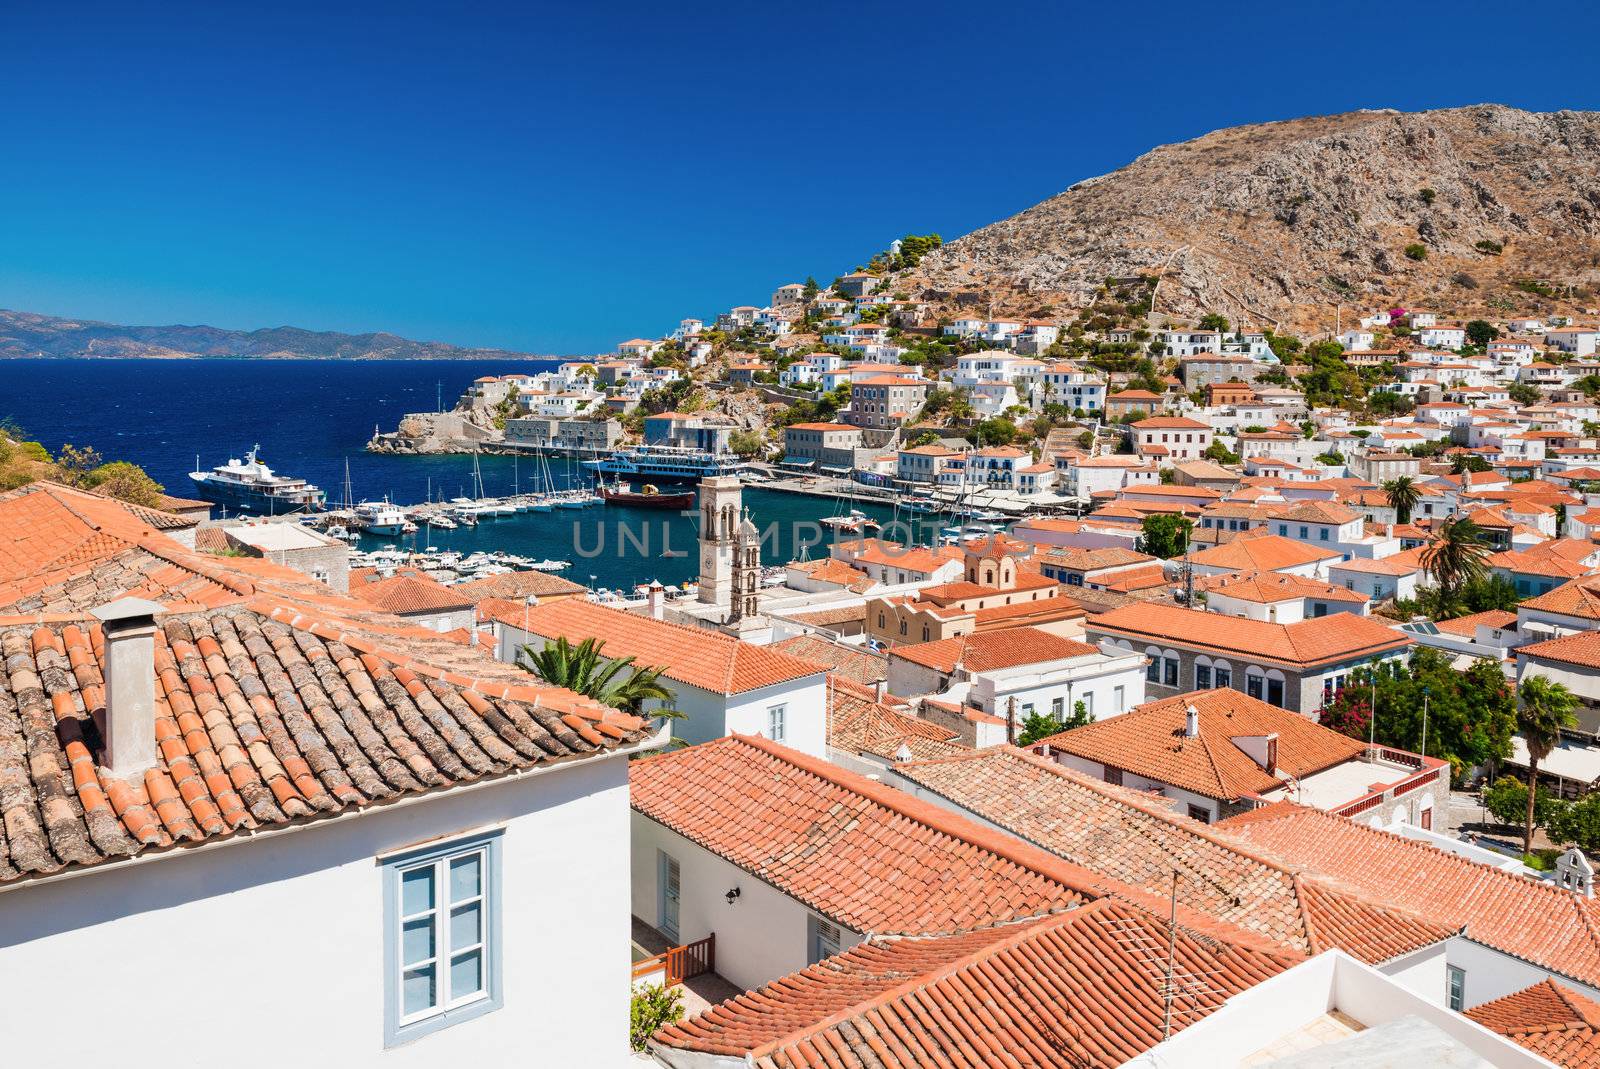 Overview of the beautiful island of Hydra, Greece, showing its main town and port